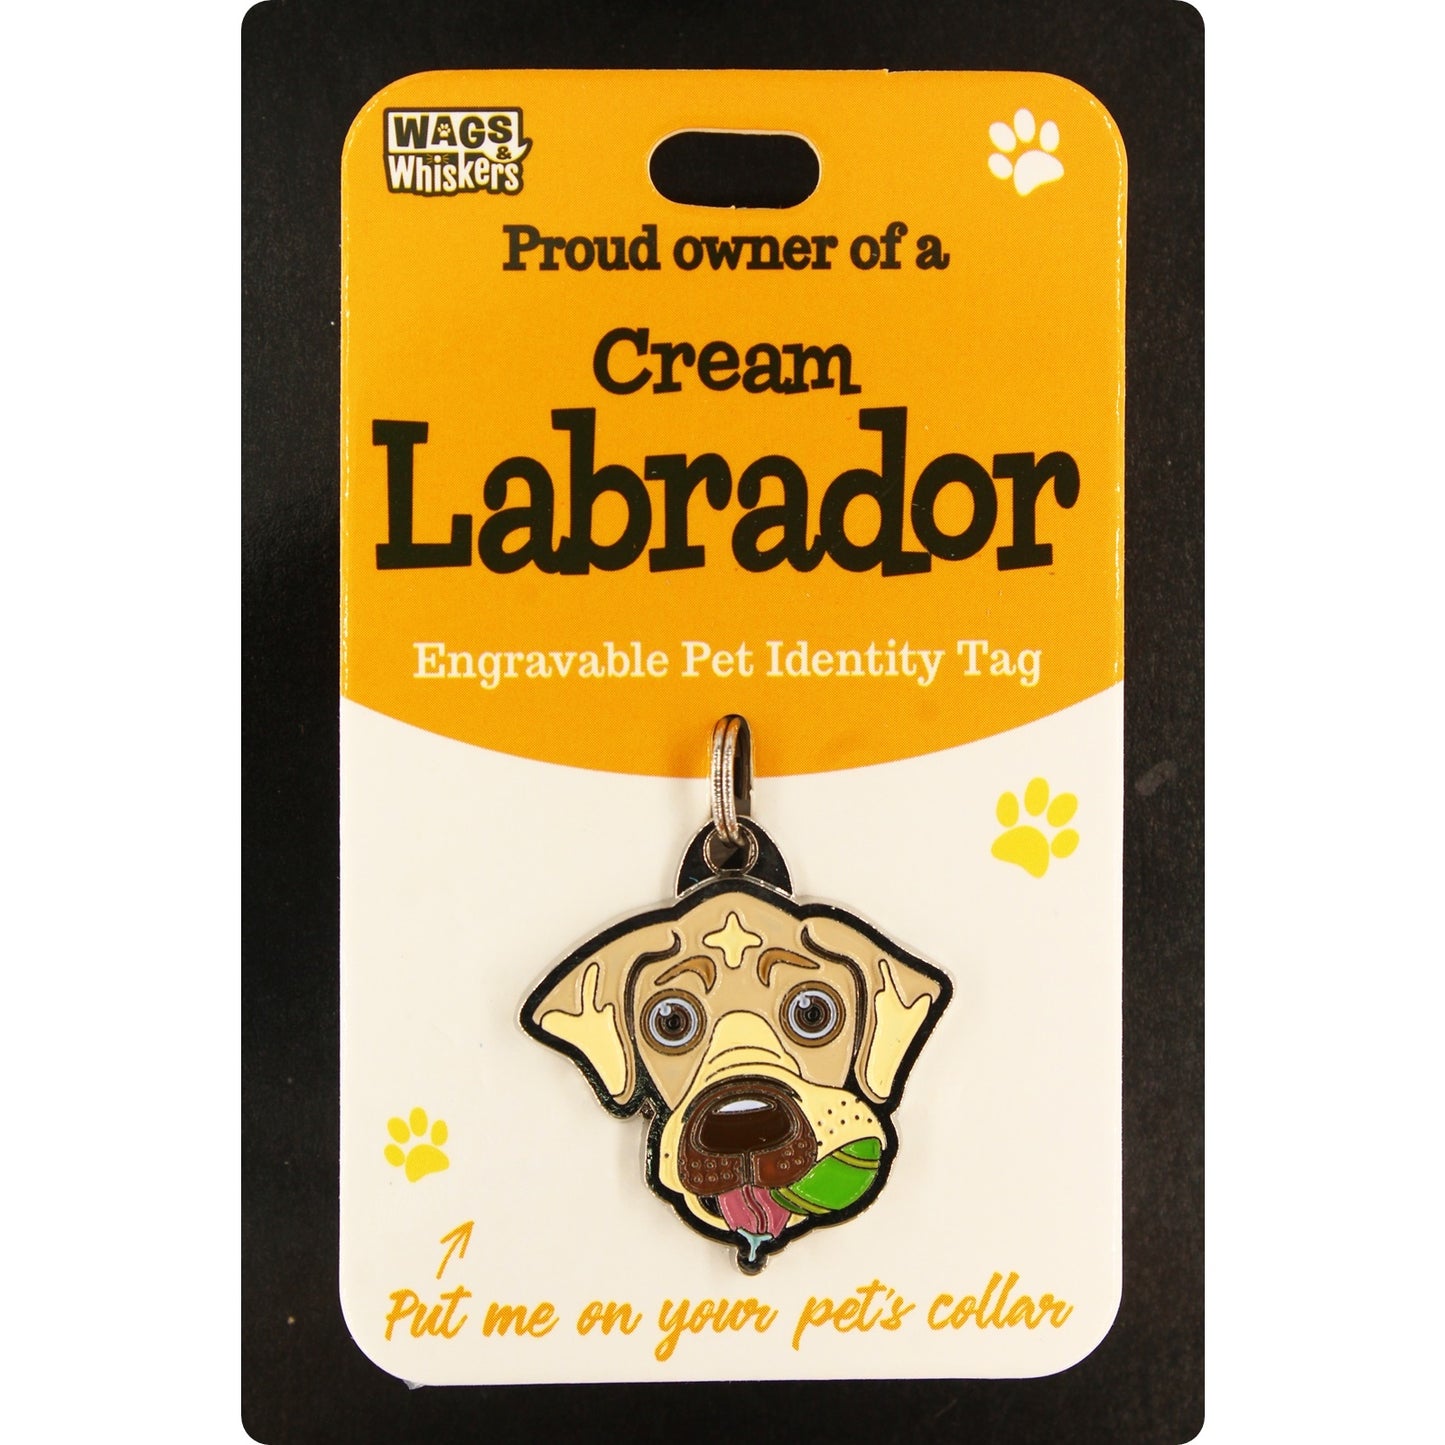 DESIRABLE GIFTS CREAM LABRADOR WAGS & WHISKERS DOG PET TAG I CAN NOT ENGRAVE THIS ITEM